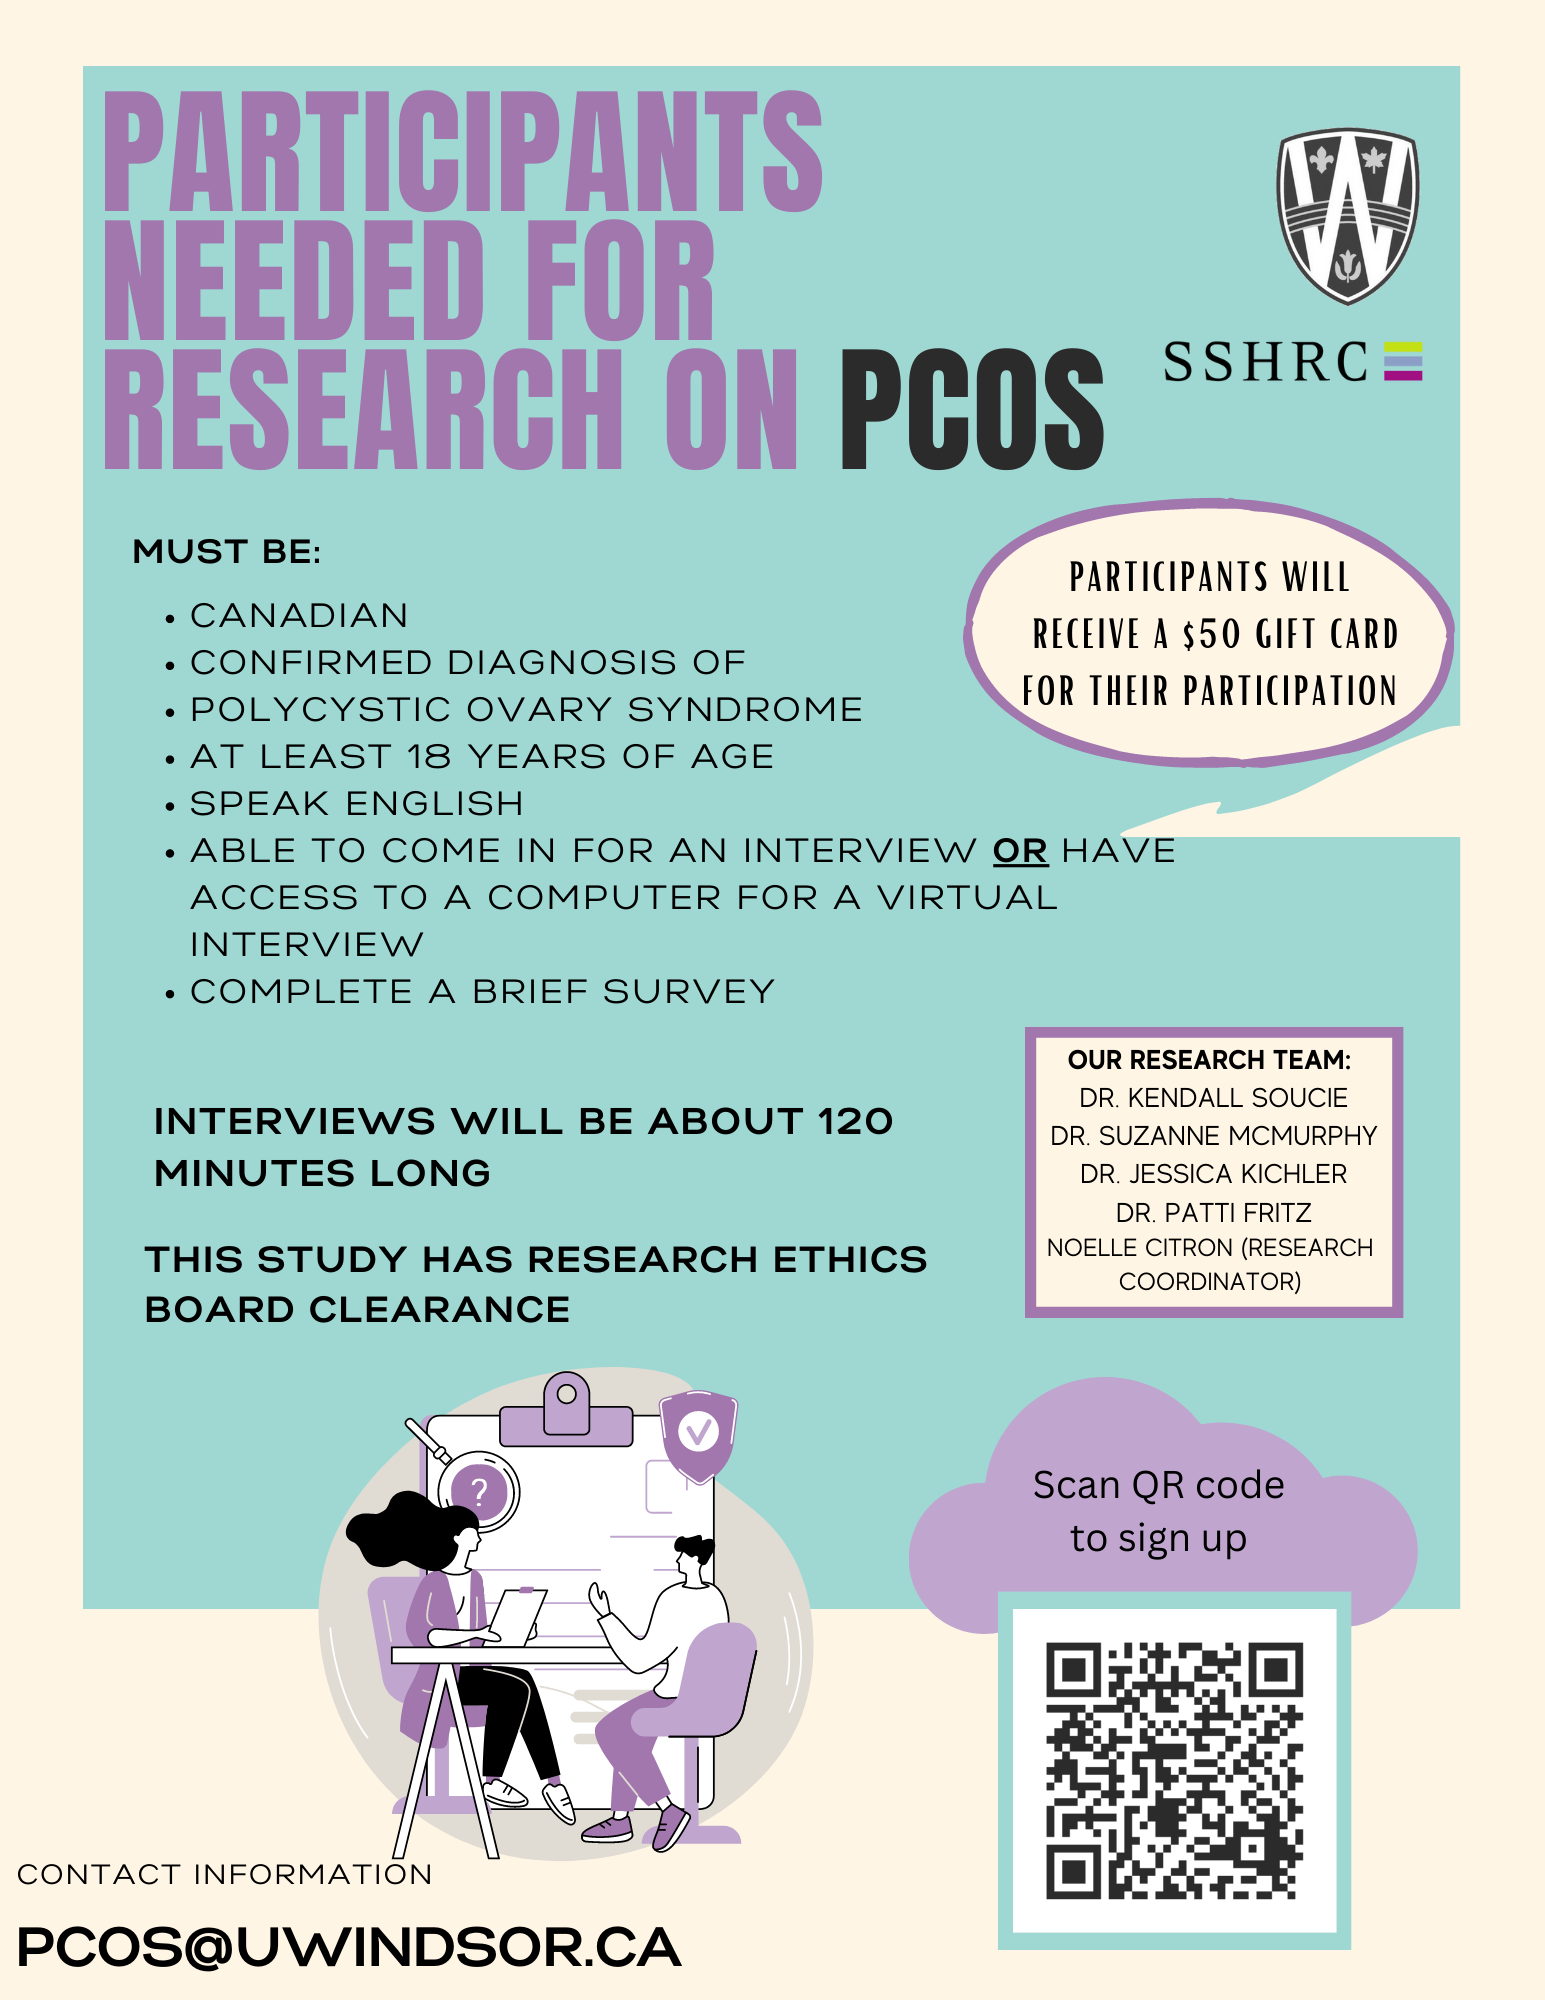 Participants needed for research on PCOS